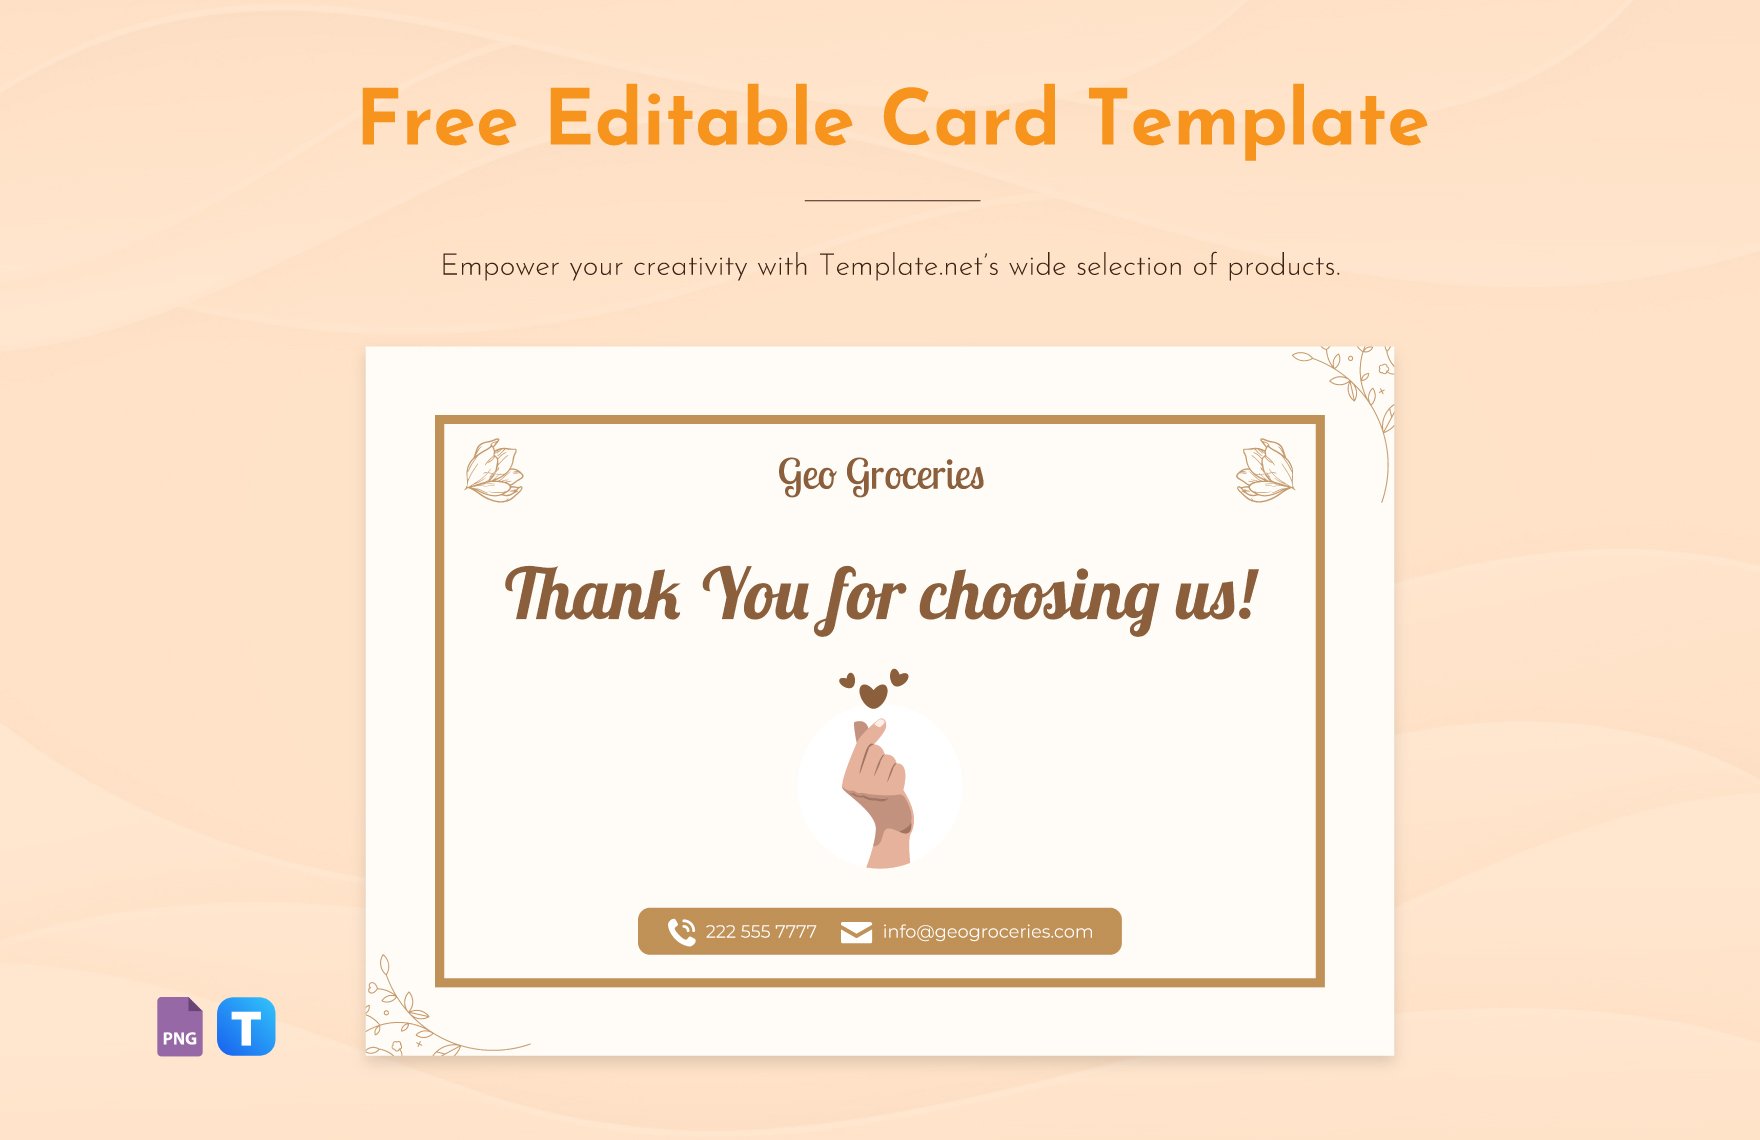 Editable Card Template in PNG